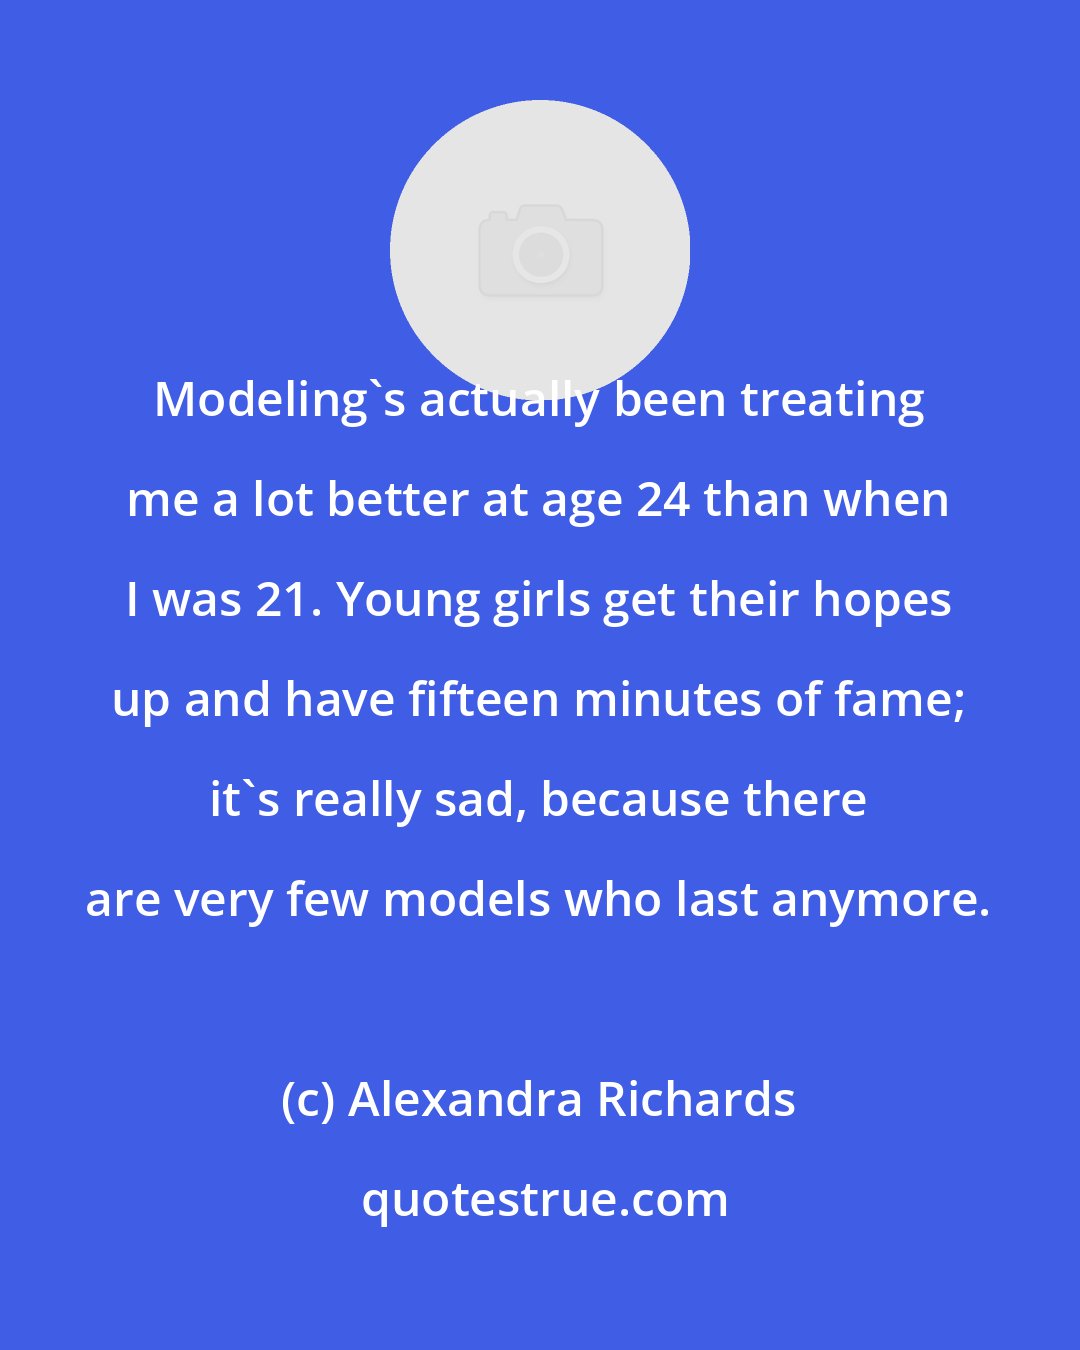 Alexandra Richards: Modeling's actually been treating me a lot better at age 24 than when I was 21. Young girls get their hopes up and have fifteen minutes of fame; it's really sad, because there are very few models who last anymore.